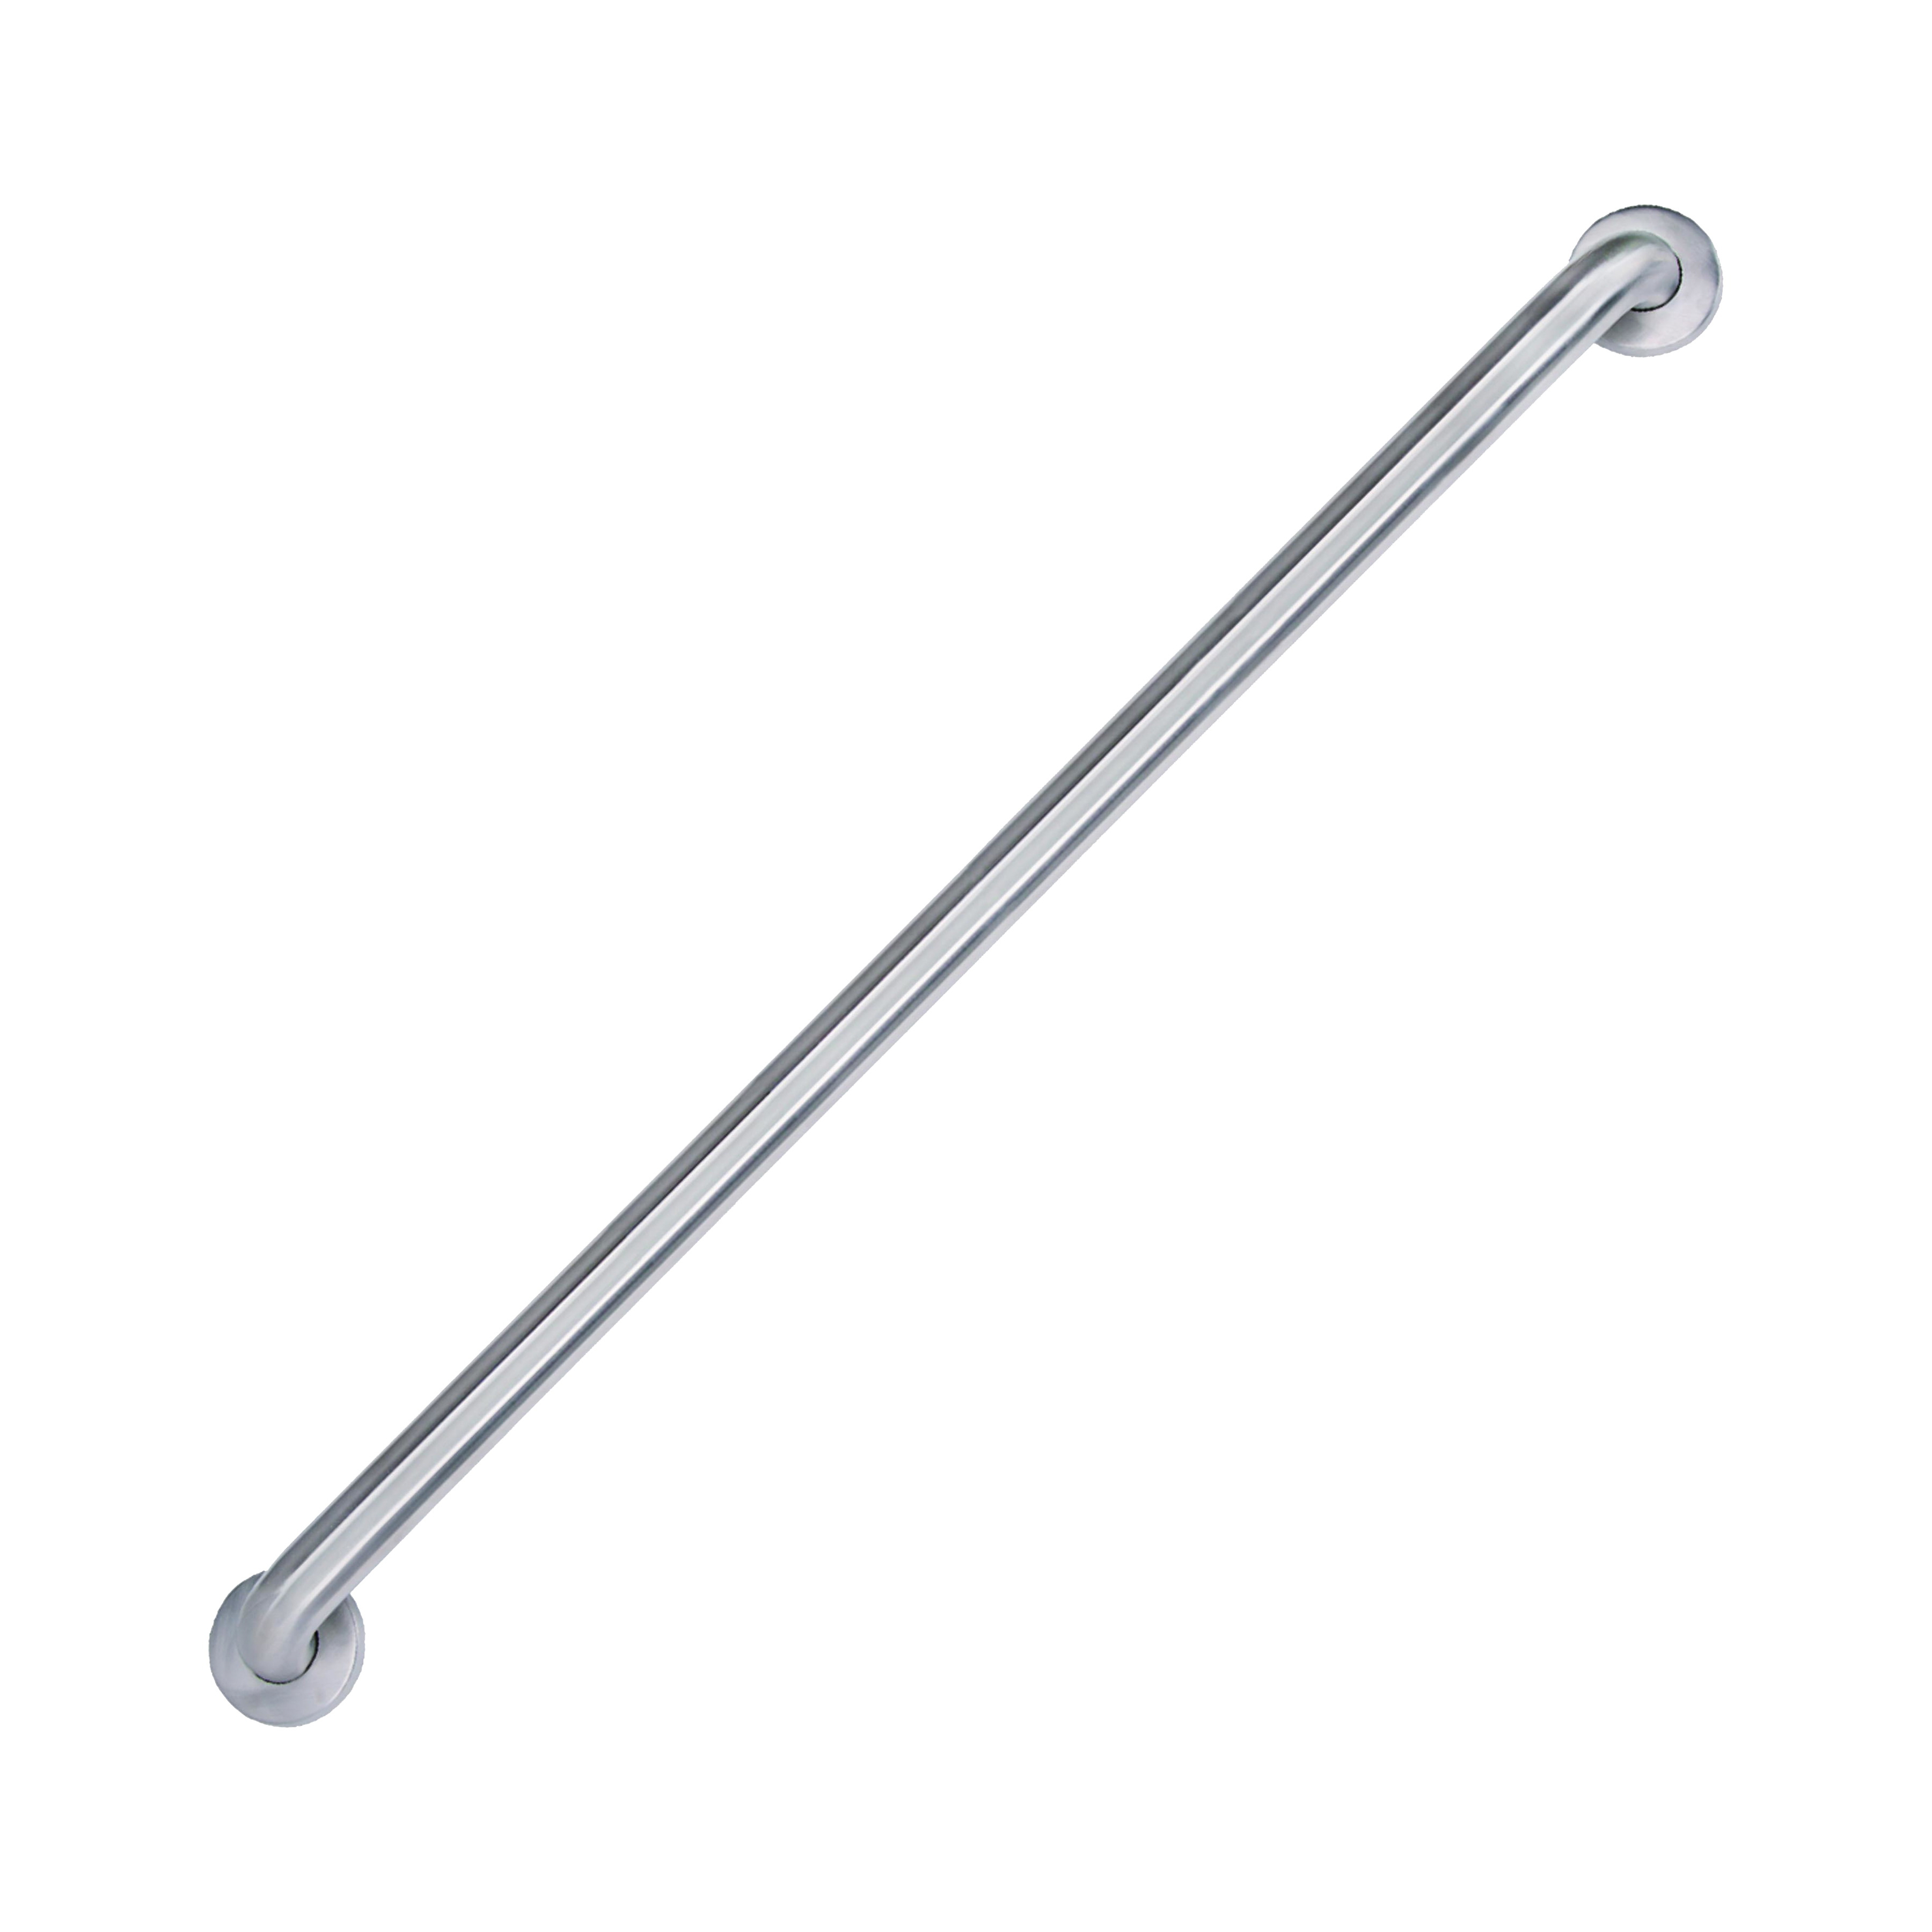 SG01-01&0142 Safety Grab Bar, 42 in L Bar, Stainless Steel, Wall Mounted Mounting